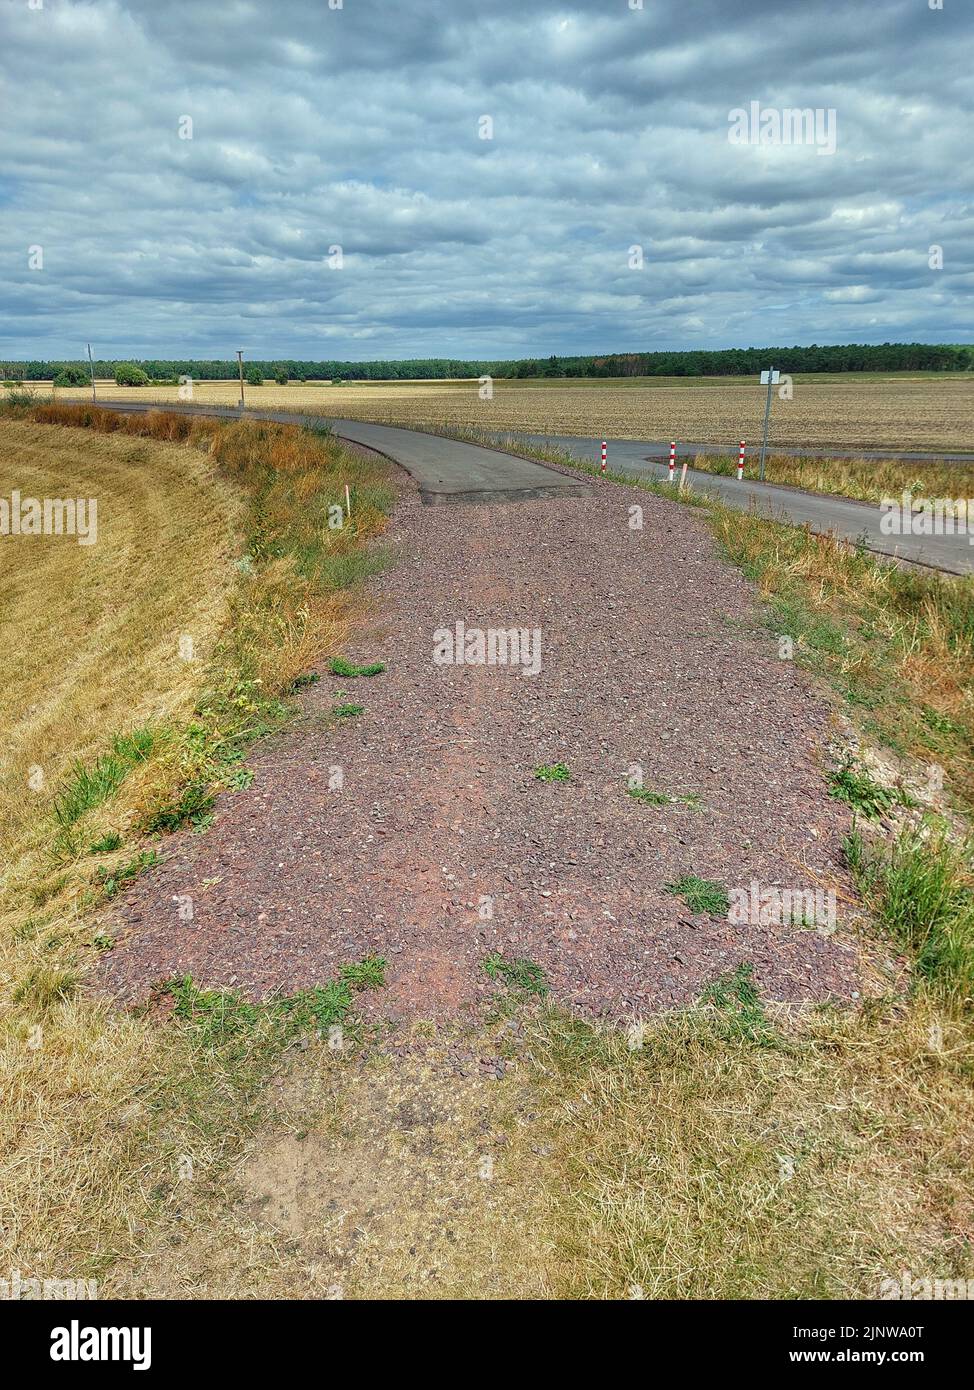 A small road ending in gravel and dirt road. Stock Photo